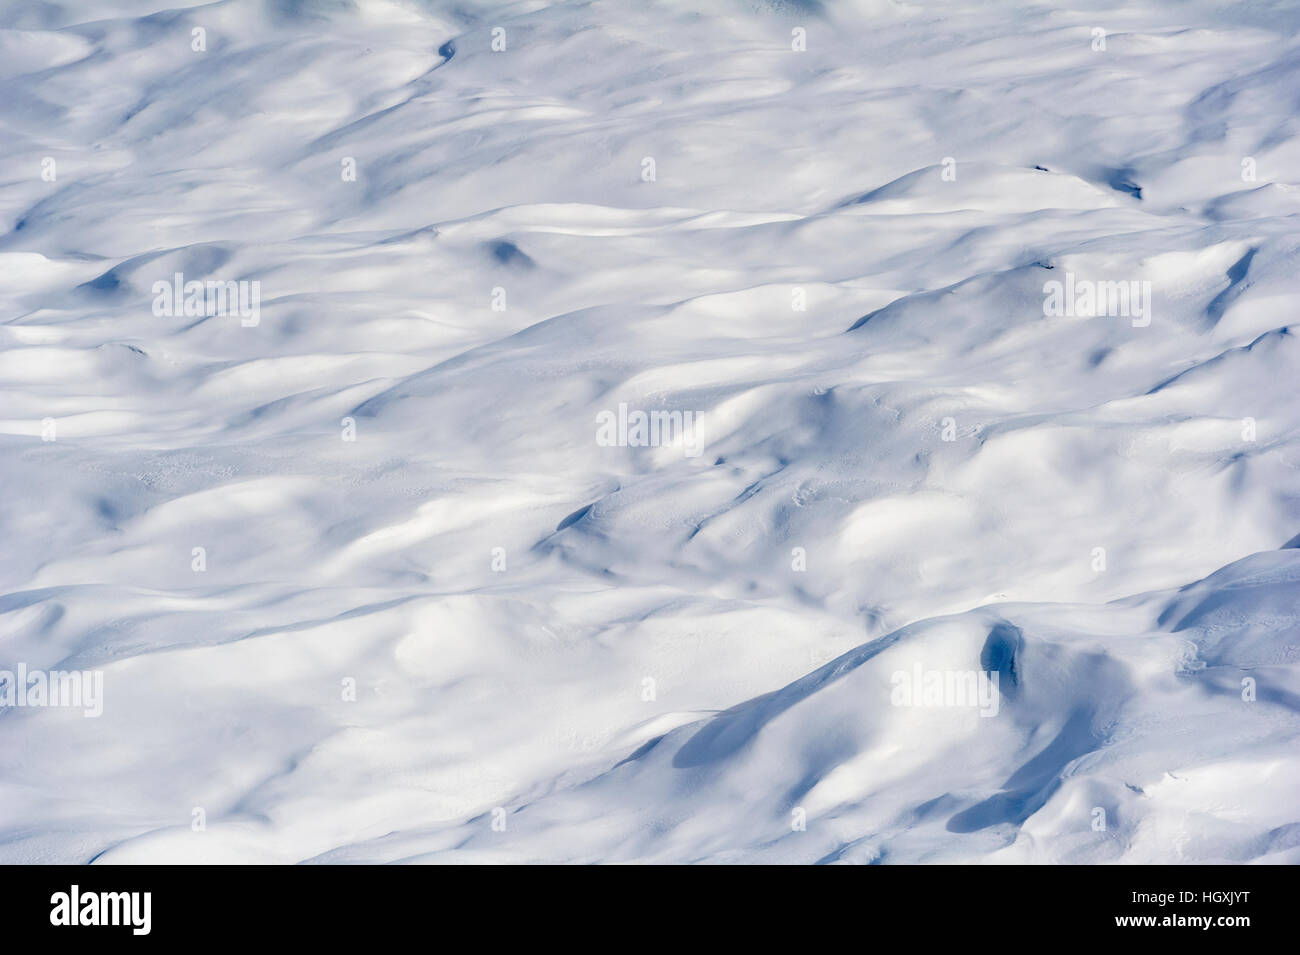 Layers of snow mask deep crevasse on the surface of the vast Greenland Ice Sheet plain. Stock Photo